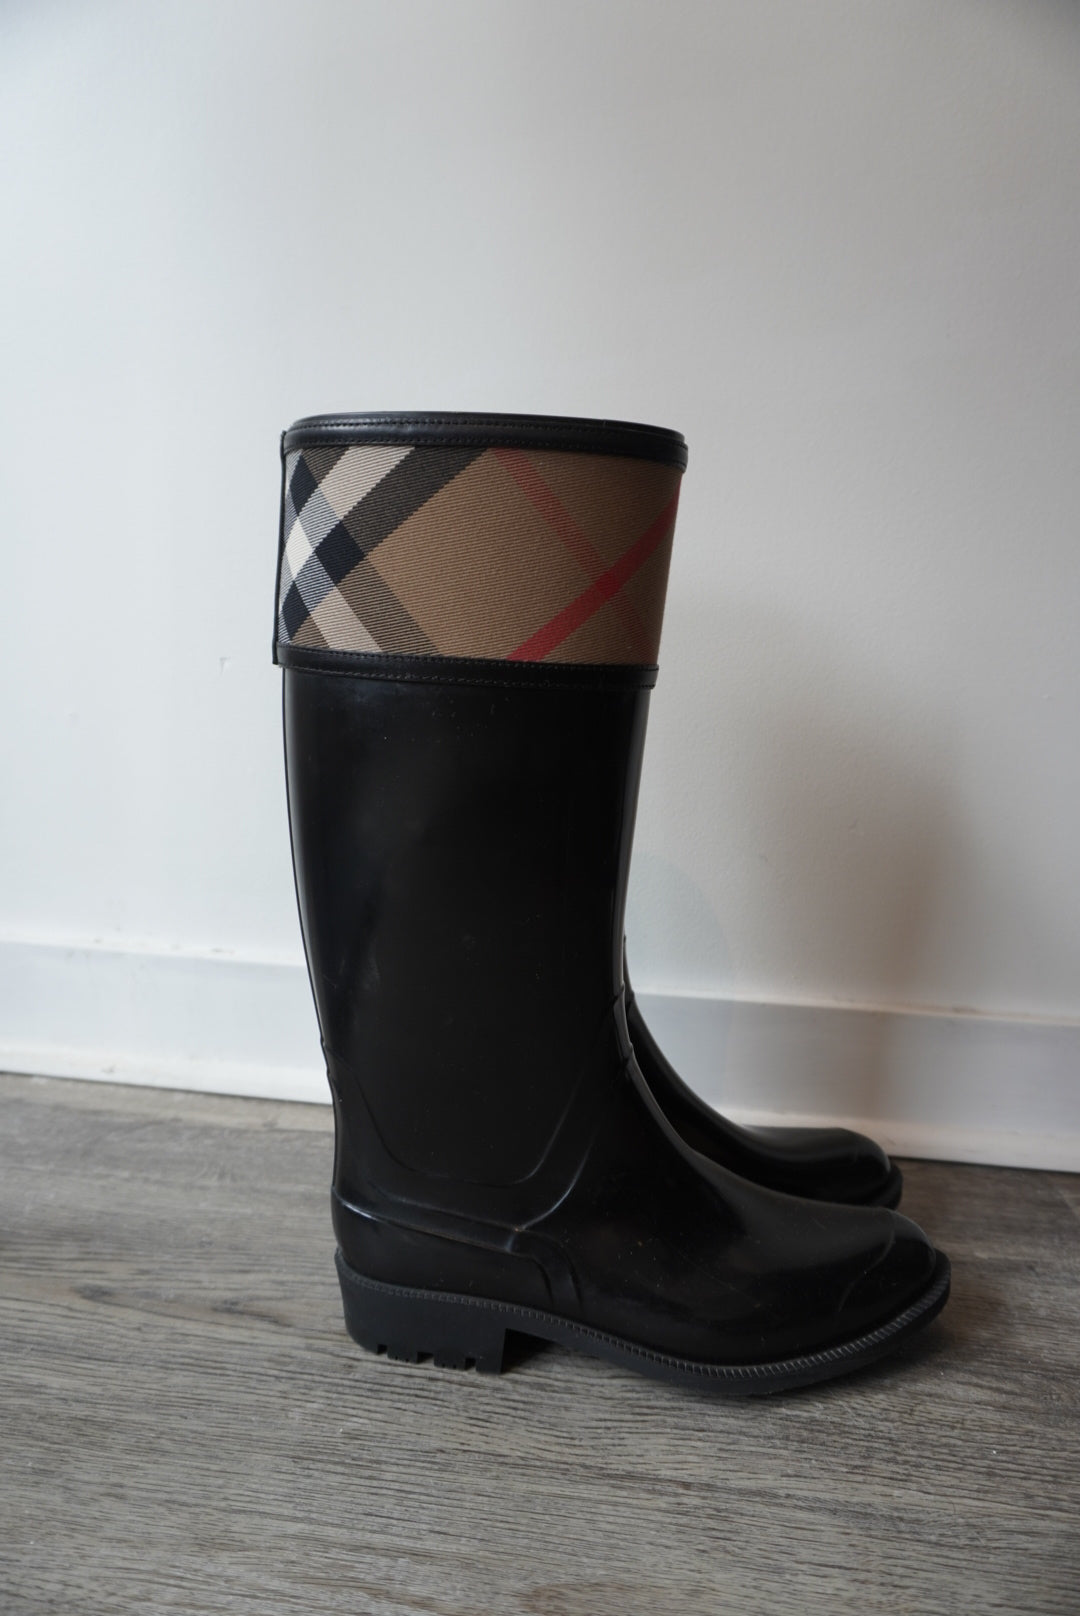 Burberry Black Rainboots, 39 - The Recollective